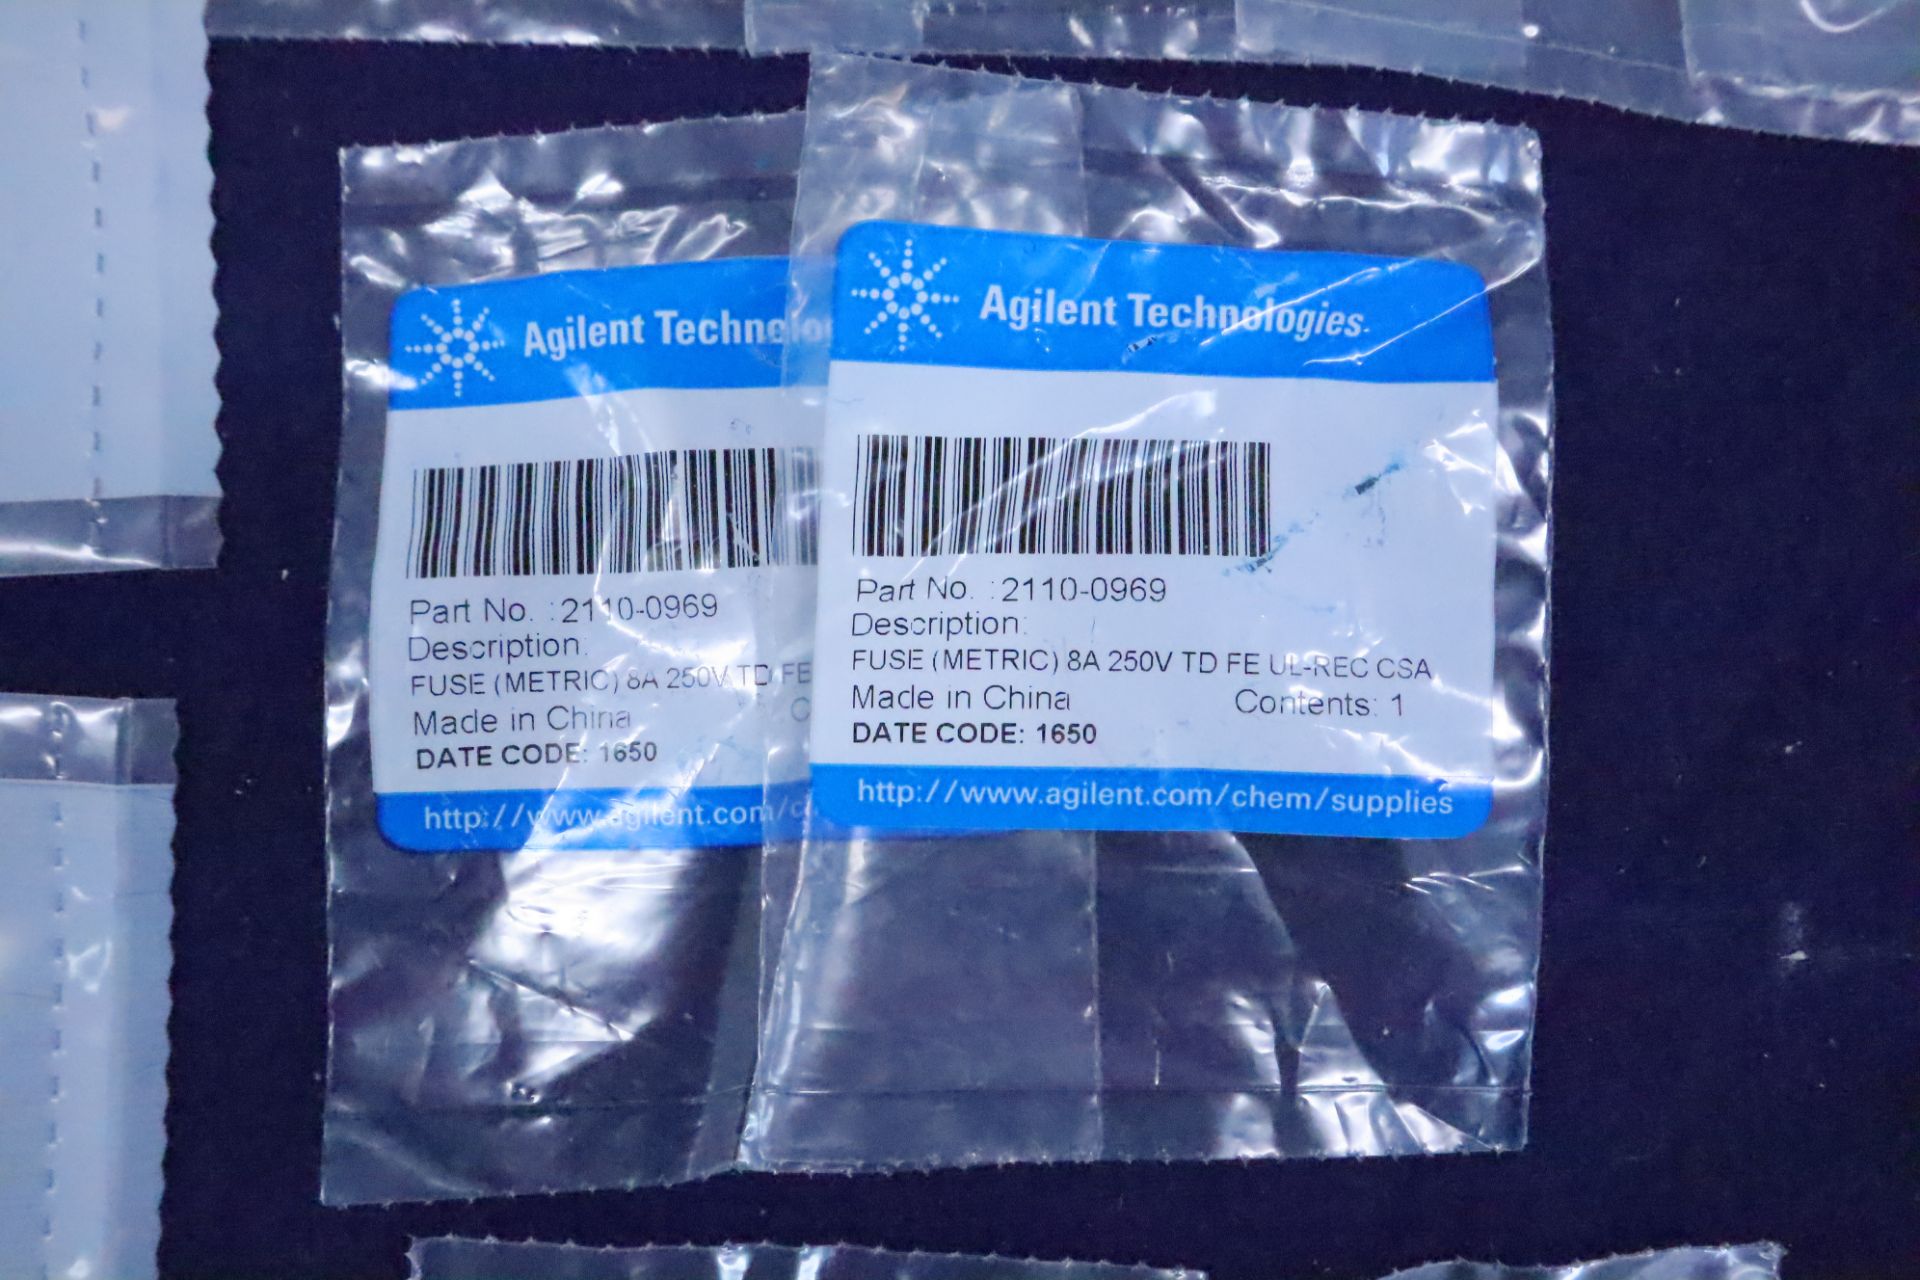 UPDATED PHOTOS Agilent Technologies OEM Replacement Parts and tool kits for LC/MS Machines - Image 31 of 37